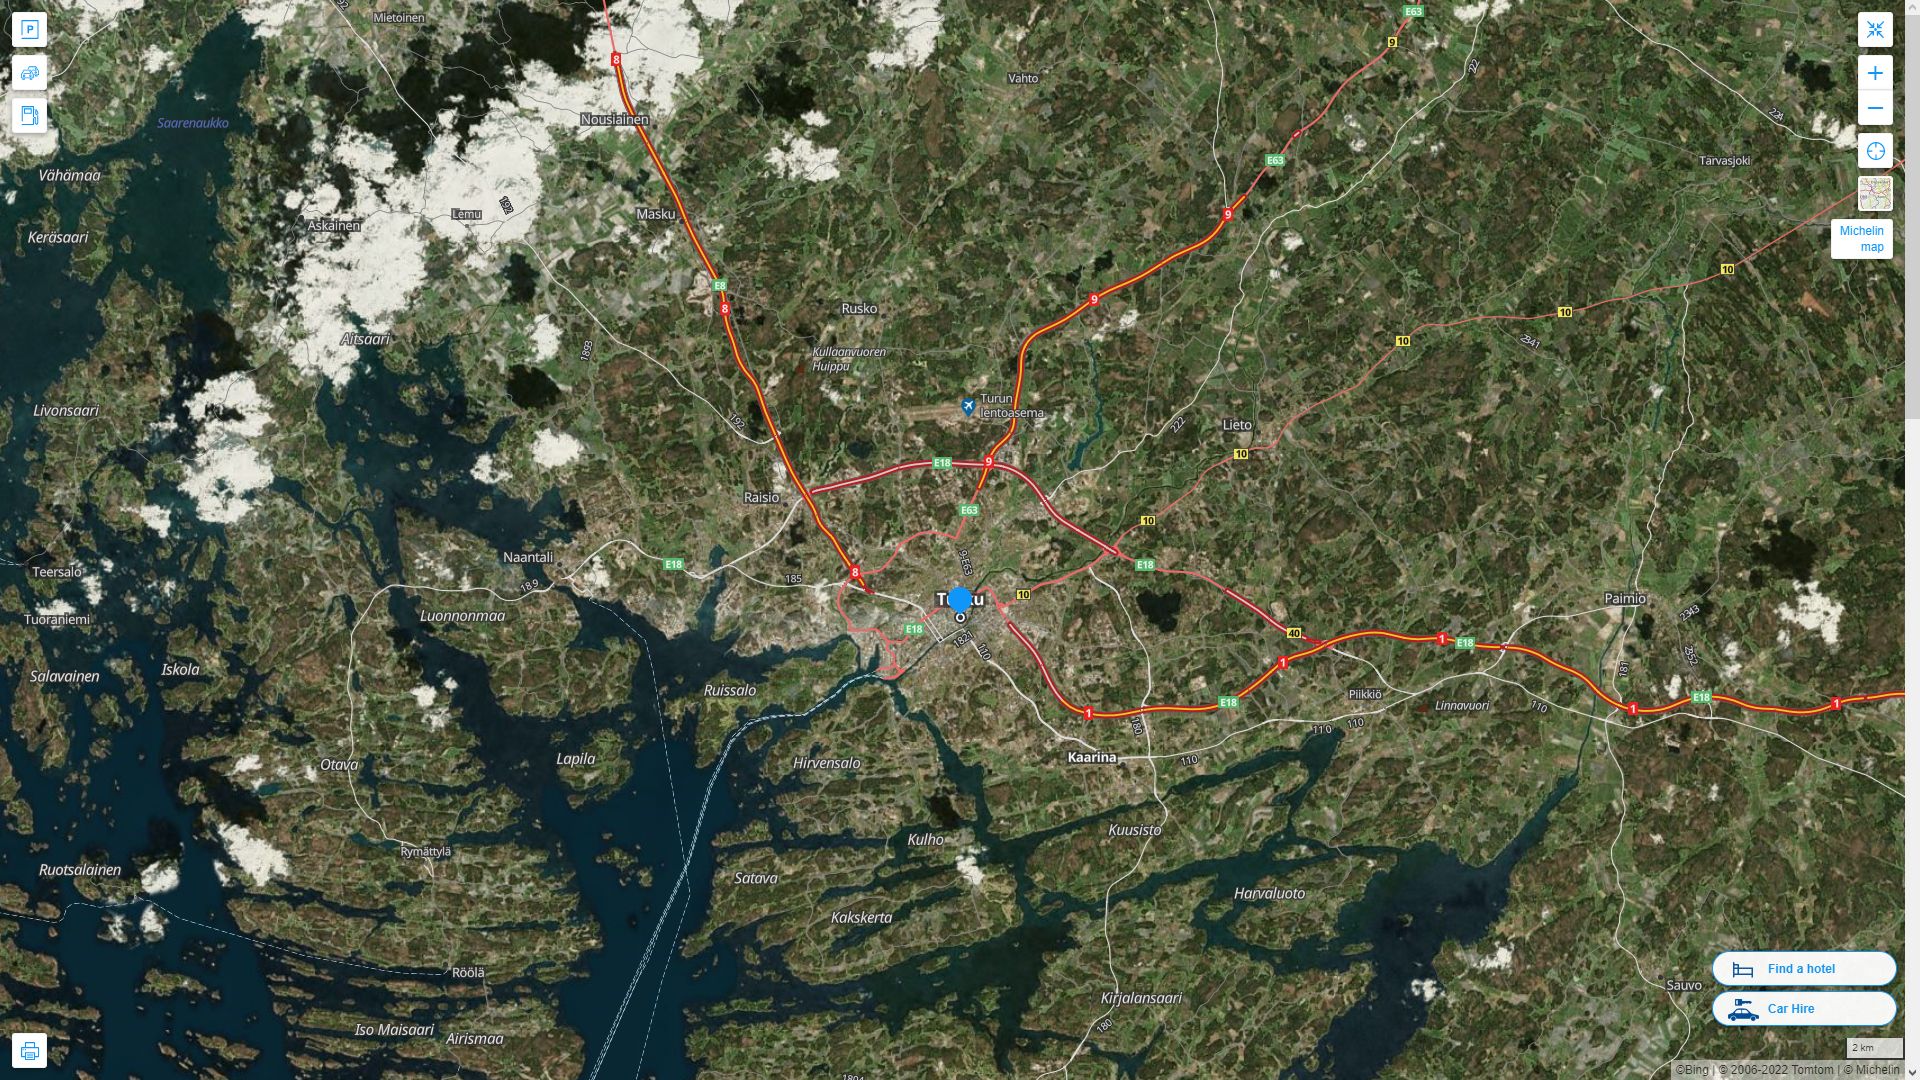 Turku Highway and Road Map with Satellite View